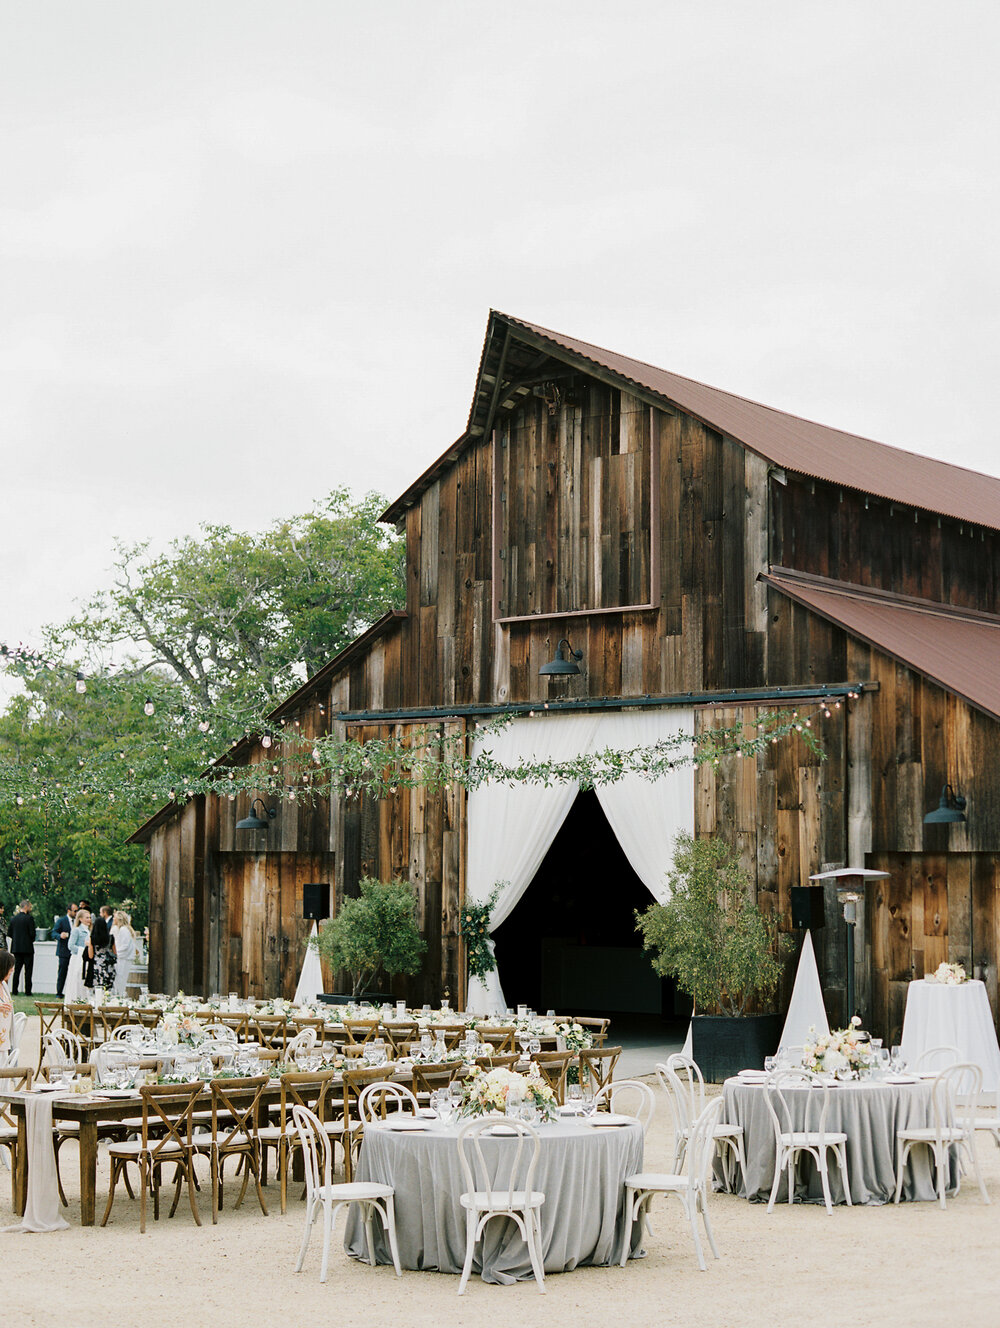 Martha Stewart Weddings This Wedding Proves You Can Seamlessly Marry Classic And Rustic Decor In One Event Greengate Ranch Vineyard